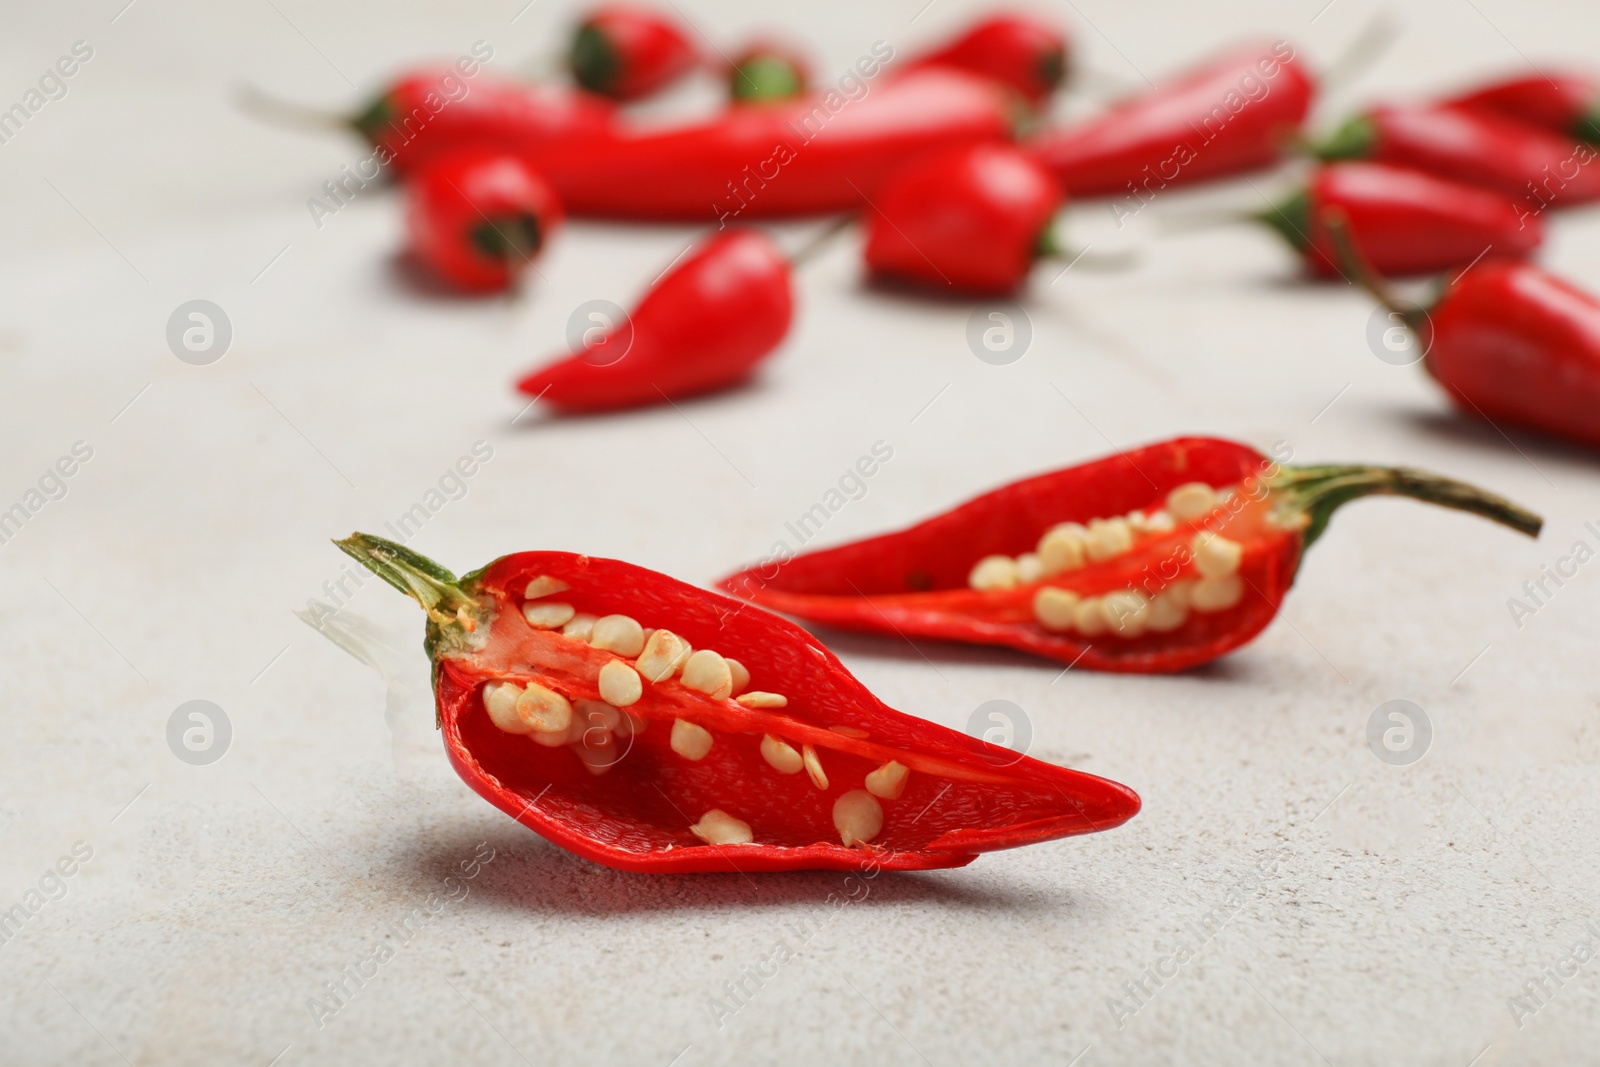 Photo of Cut in halves red chili pepper on table